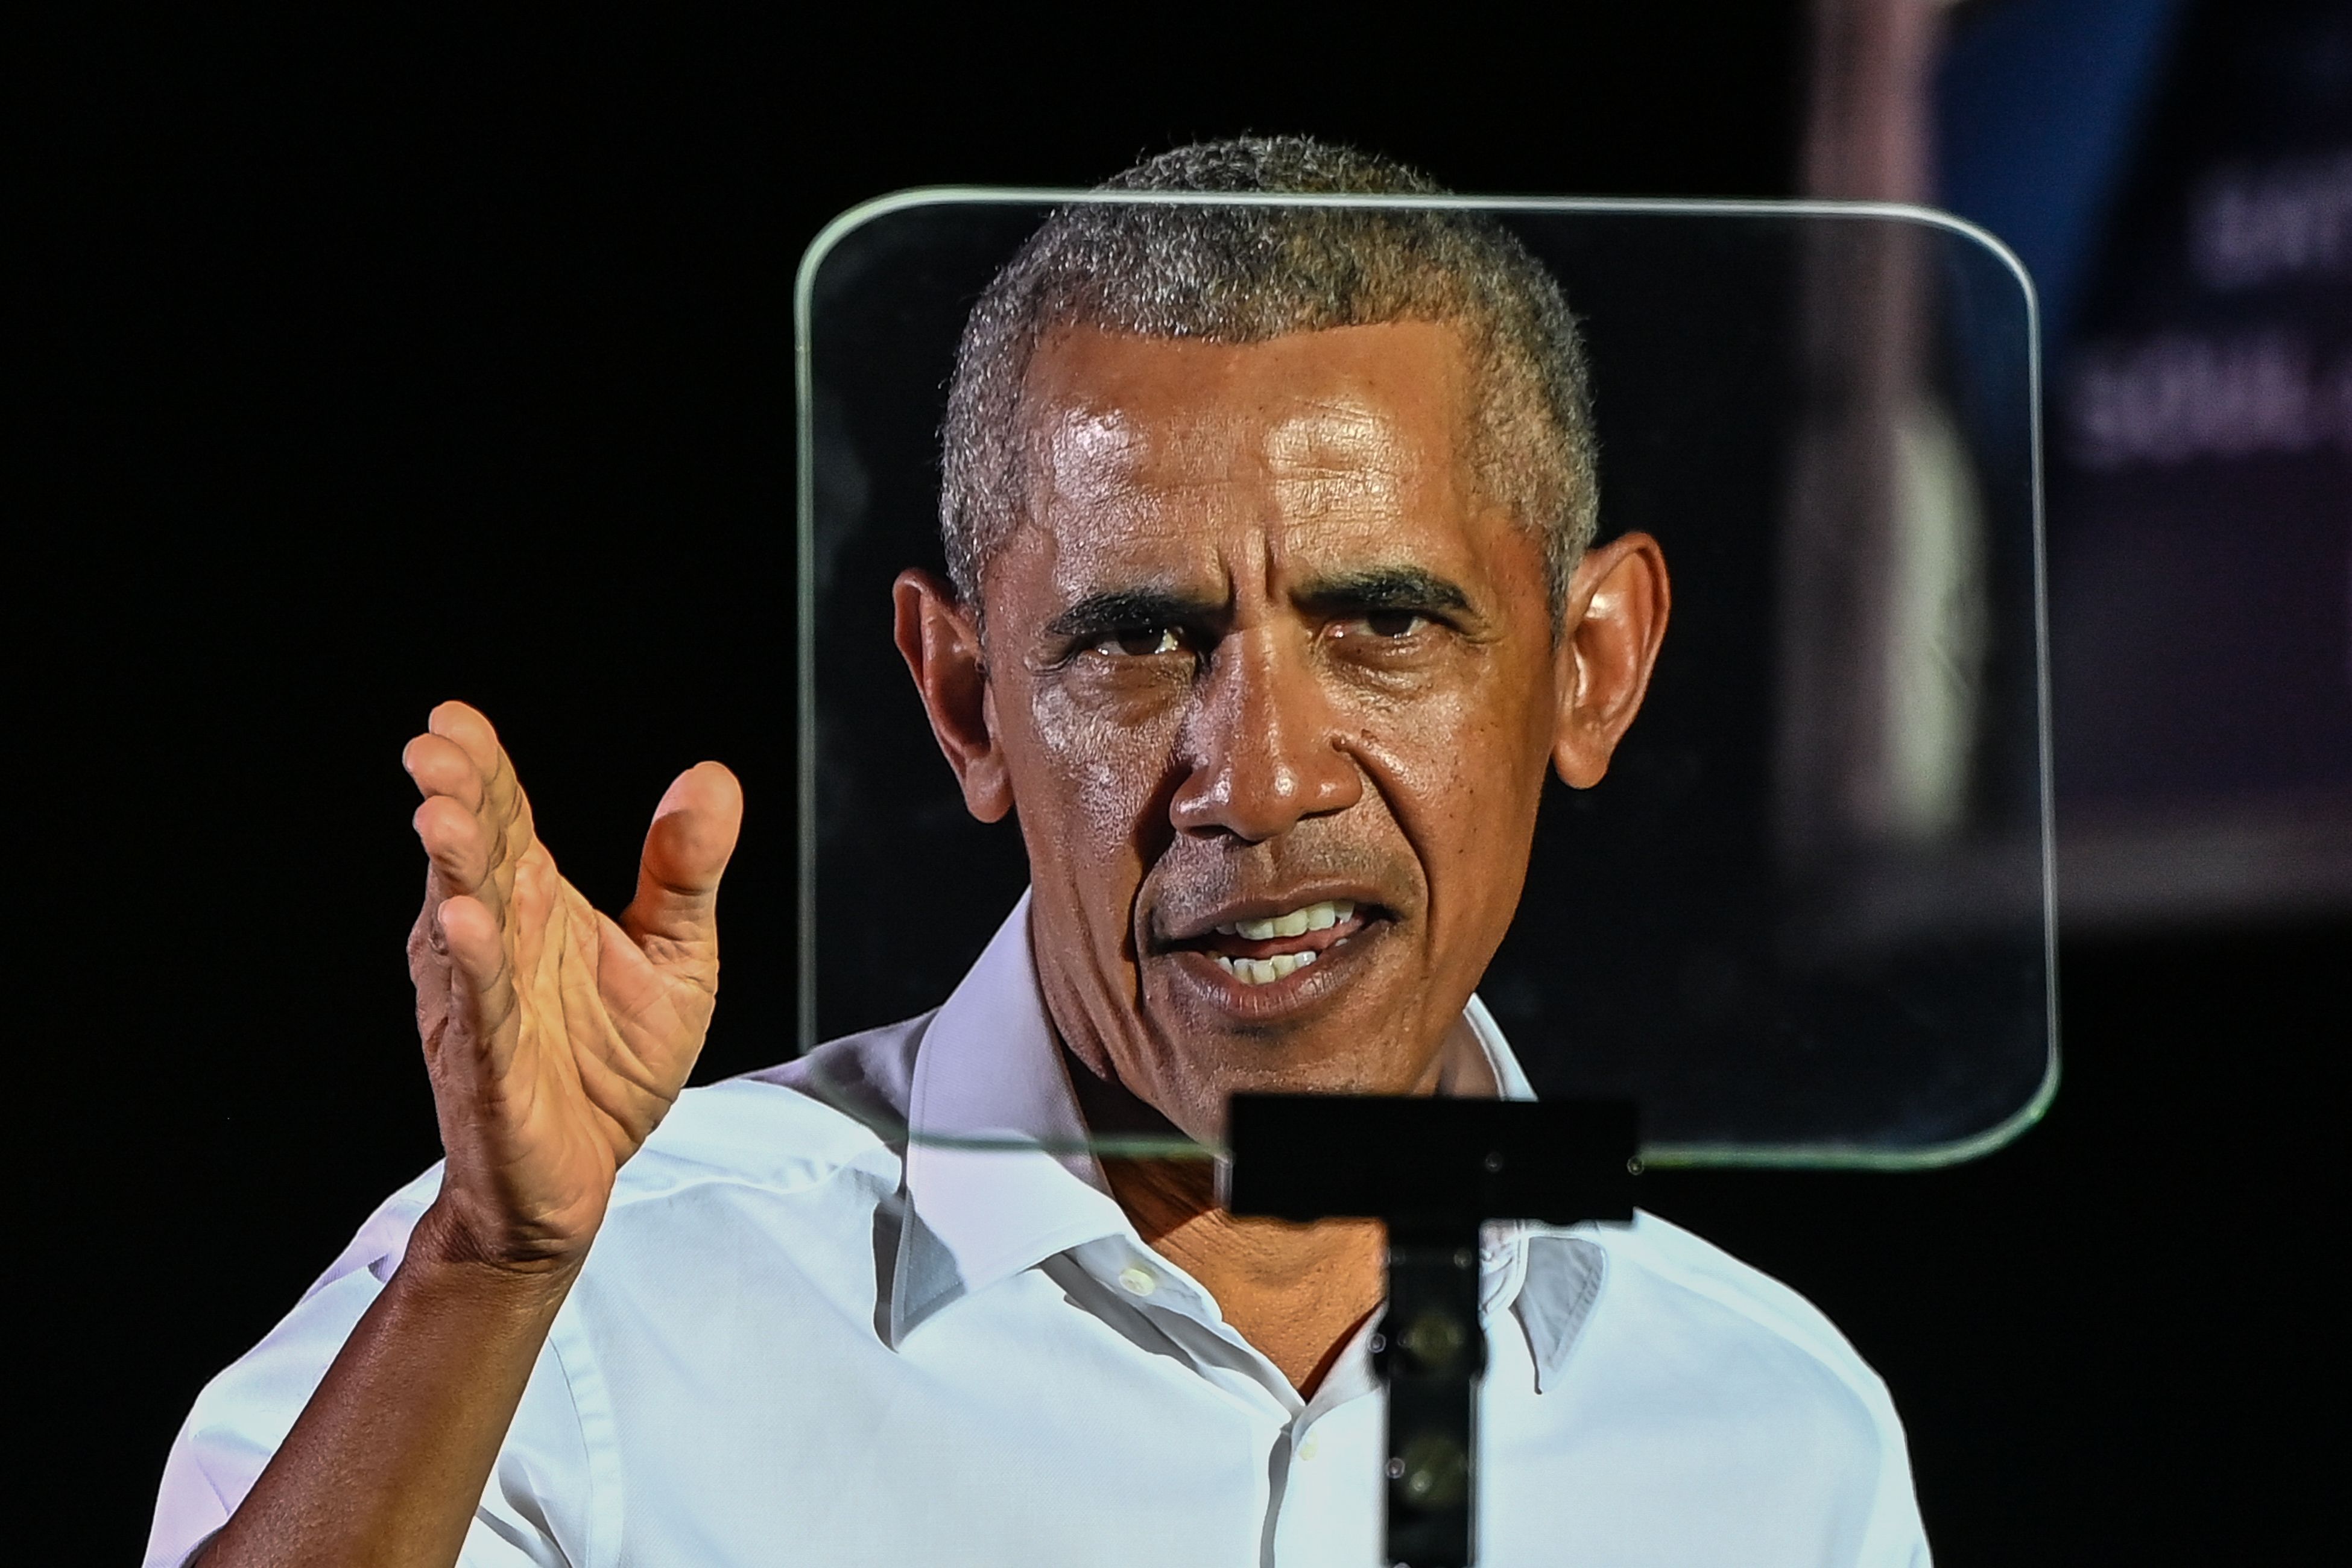 Former US President Barack Obama speaks at a drive-in rally as he campaigns for Democratic presidential candidate former Vice President Joe Biden in Miami, Florida on November 2